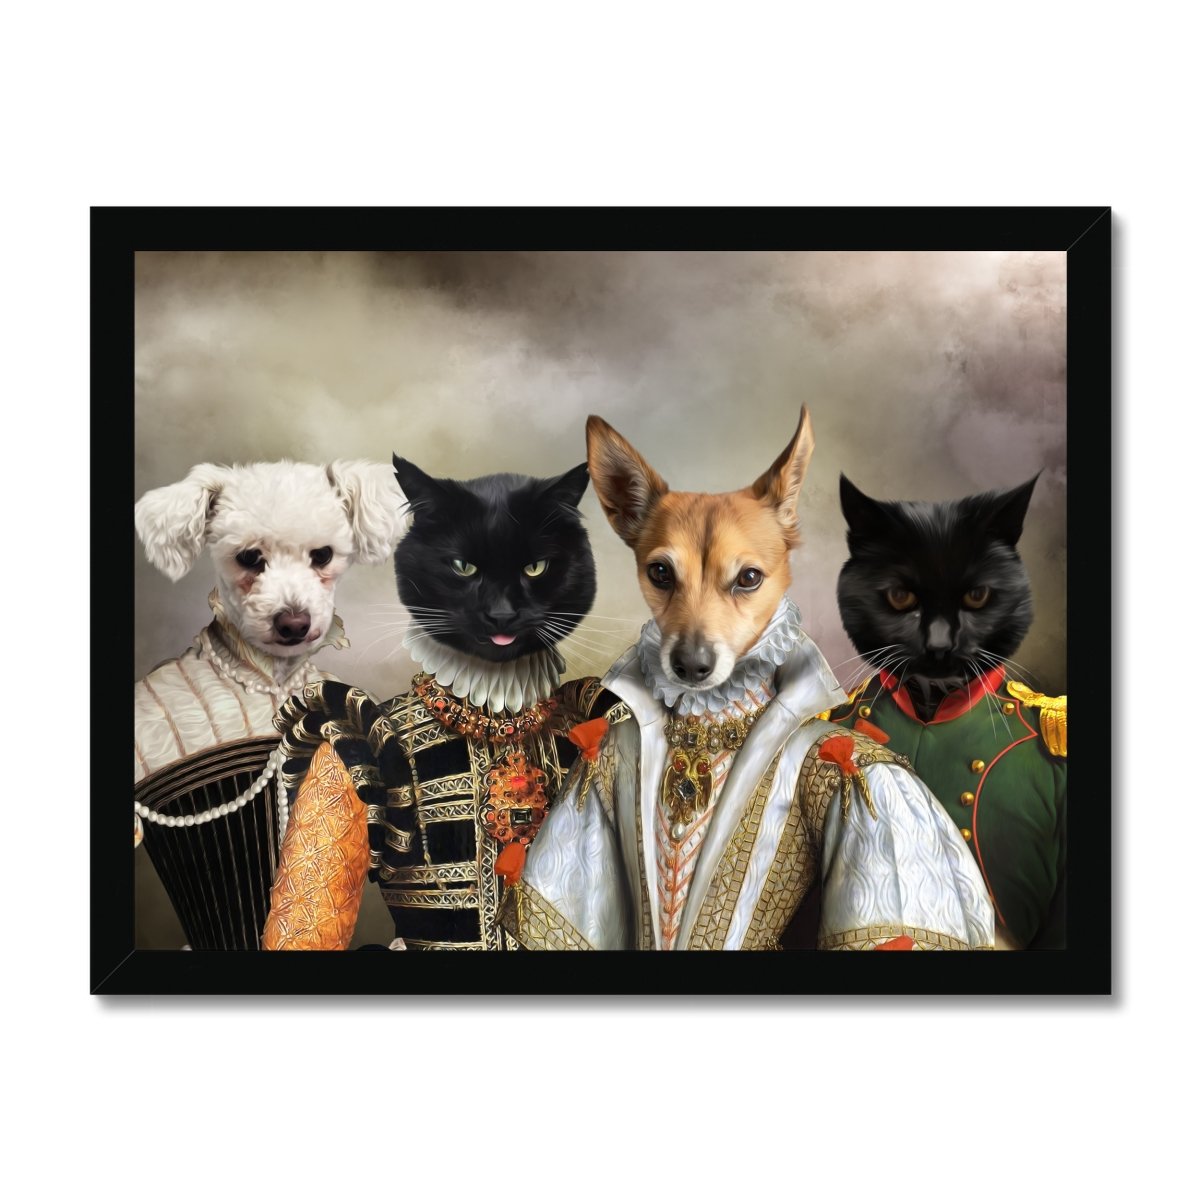 The Dignified 4: Custom Pet Portrait - Paw & Glory, paw and glory, animal portrait pictures, best dog paintings, drawing dog portraits, painting of your dog, pet portraits usa, custom pet paintings, pet portraits